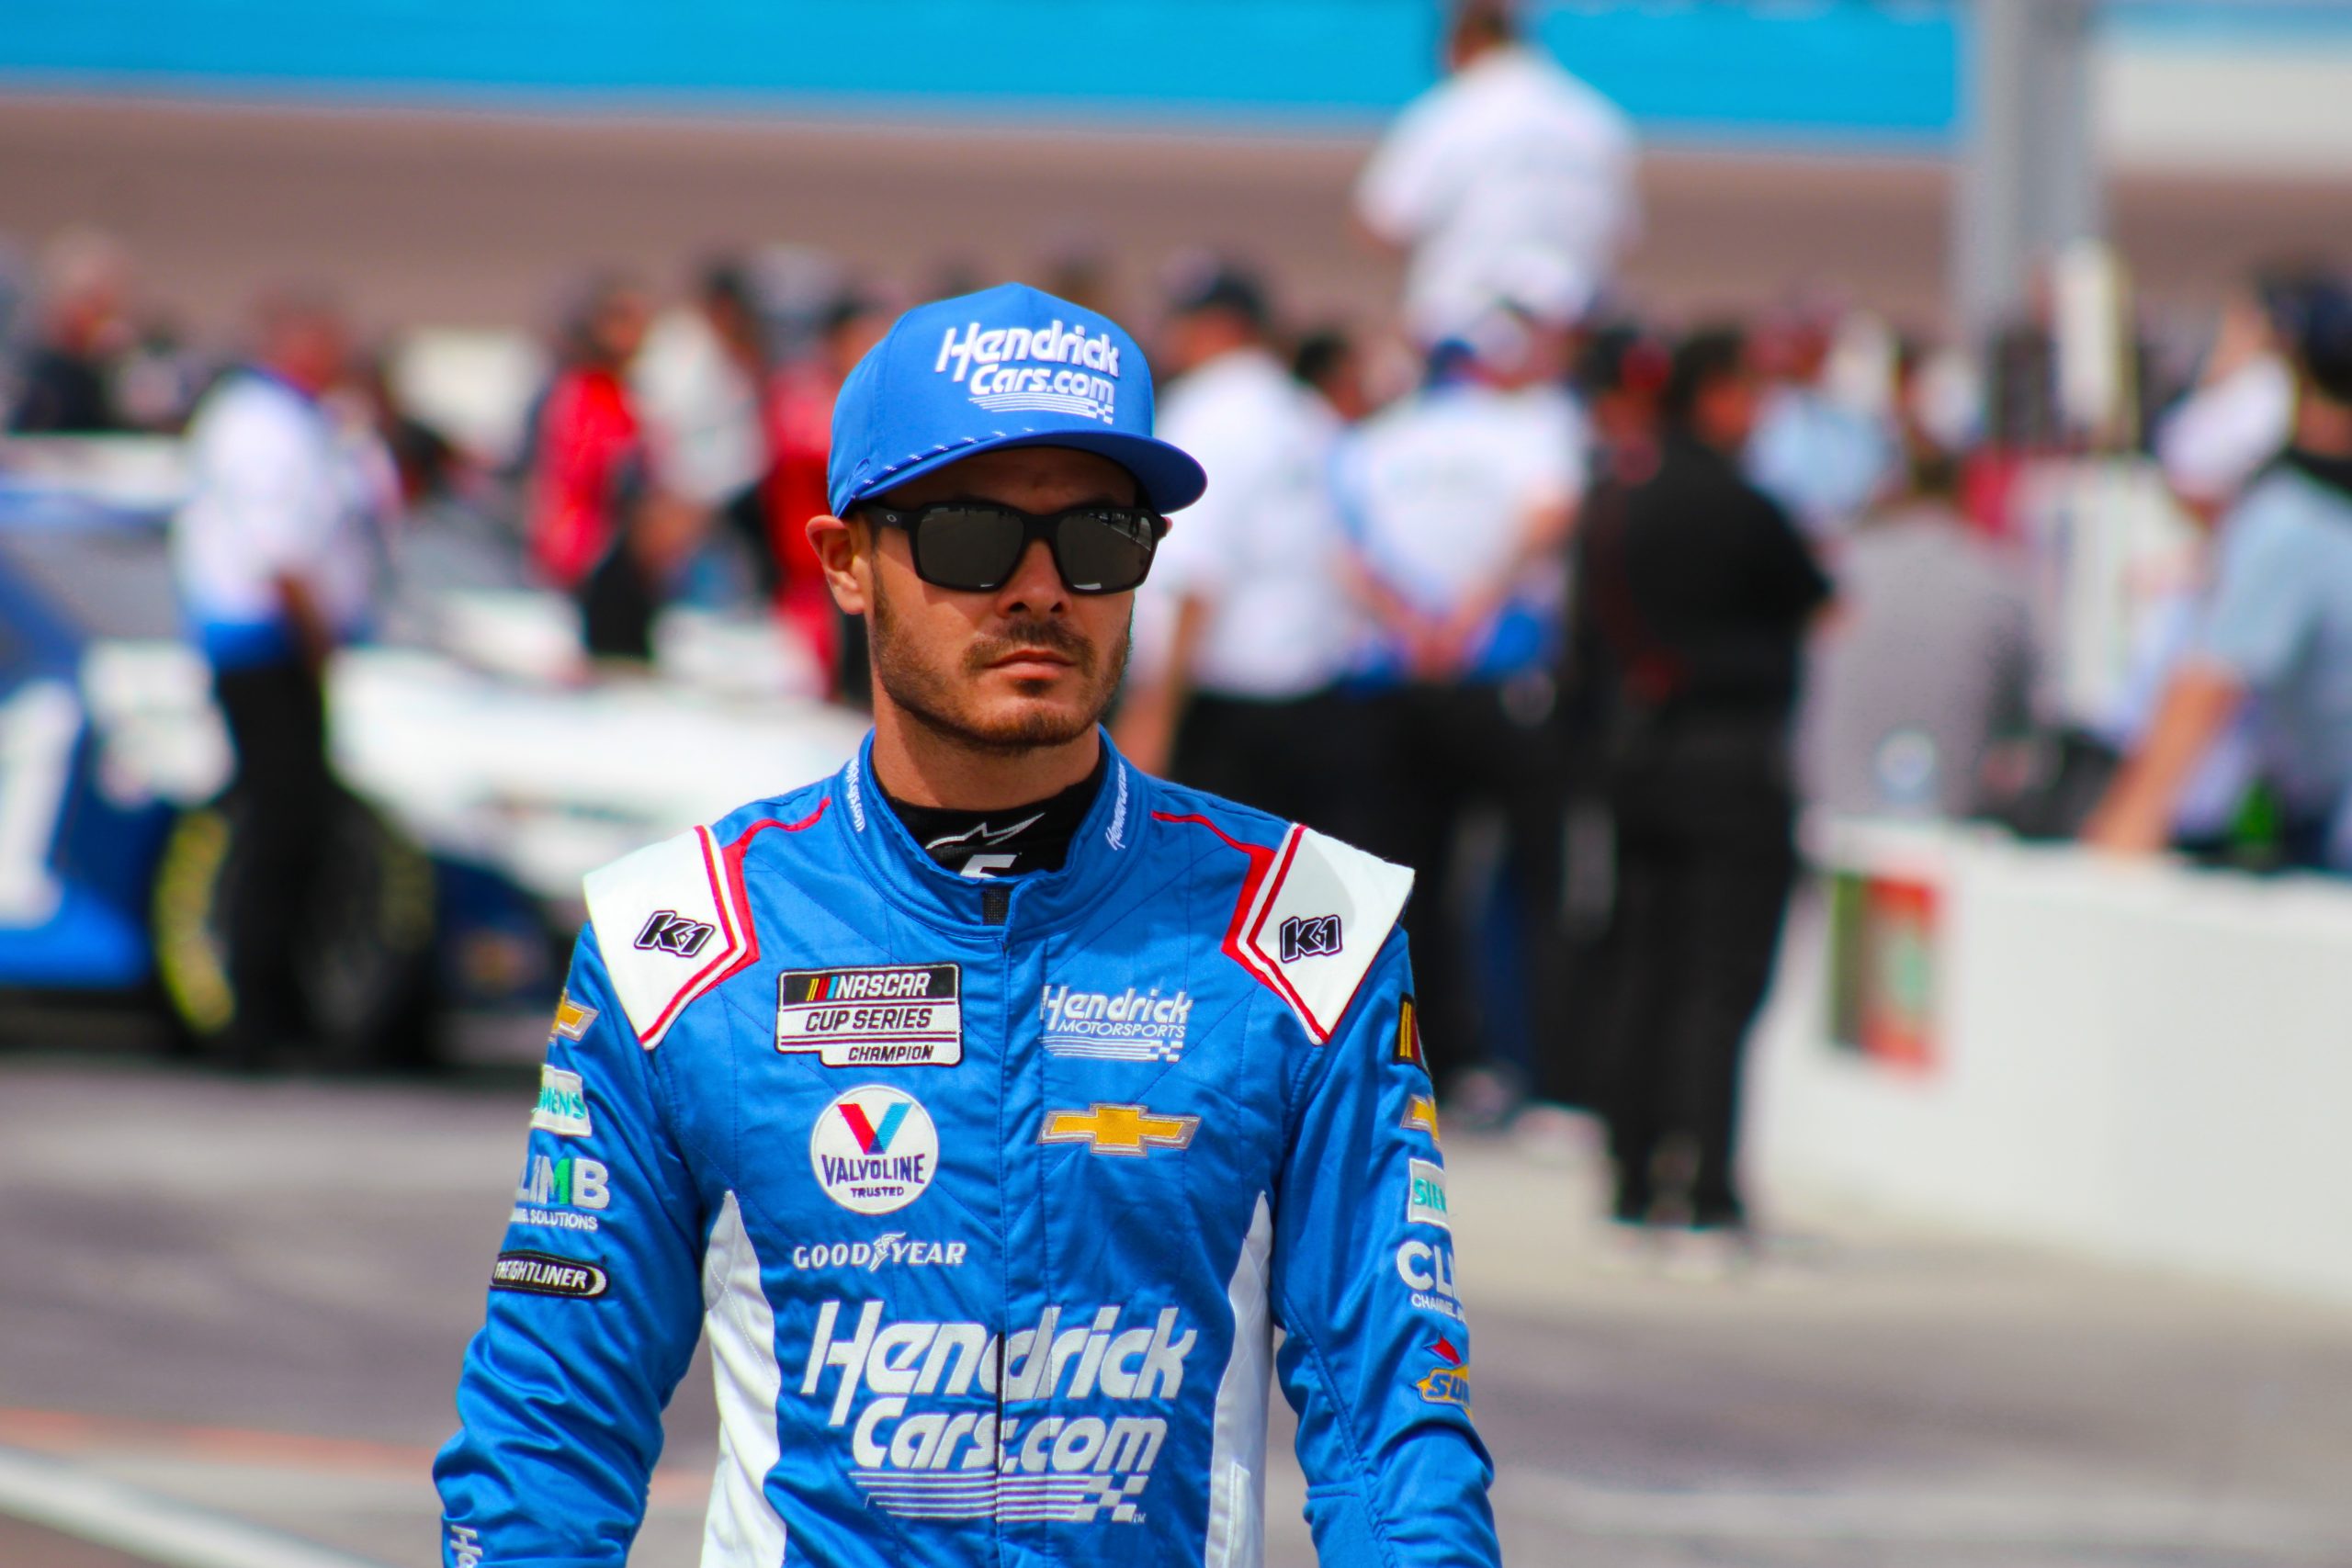 Kyle Larson hopes to convert his pole position into another victory at Phoenix Raceway. (Photo: Michael Donohue | The Podium Finish)